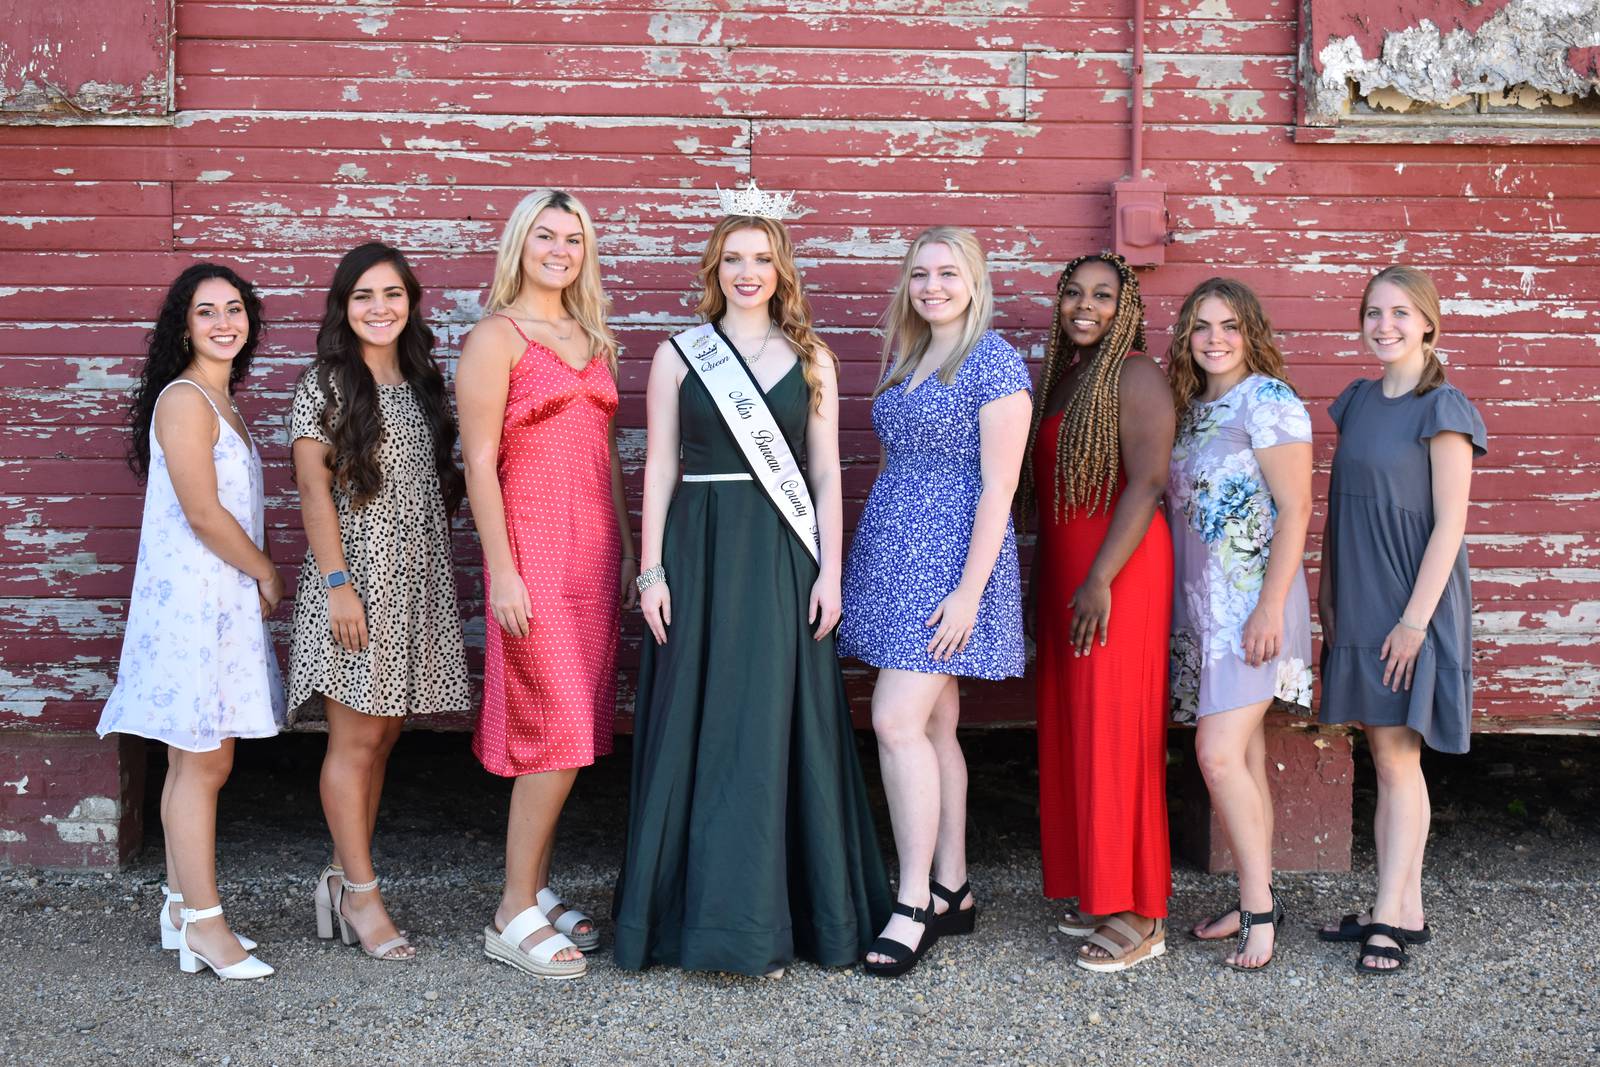 Bureau County Fair Queen Pageants will take place on Aug. 7 Shaw Local